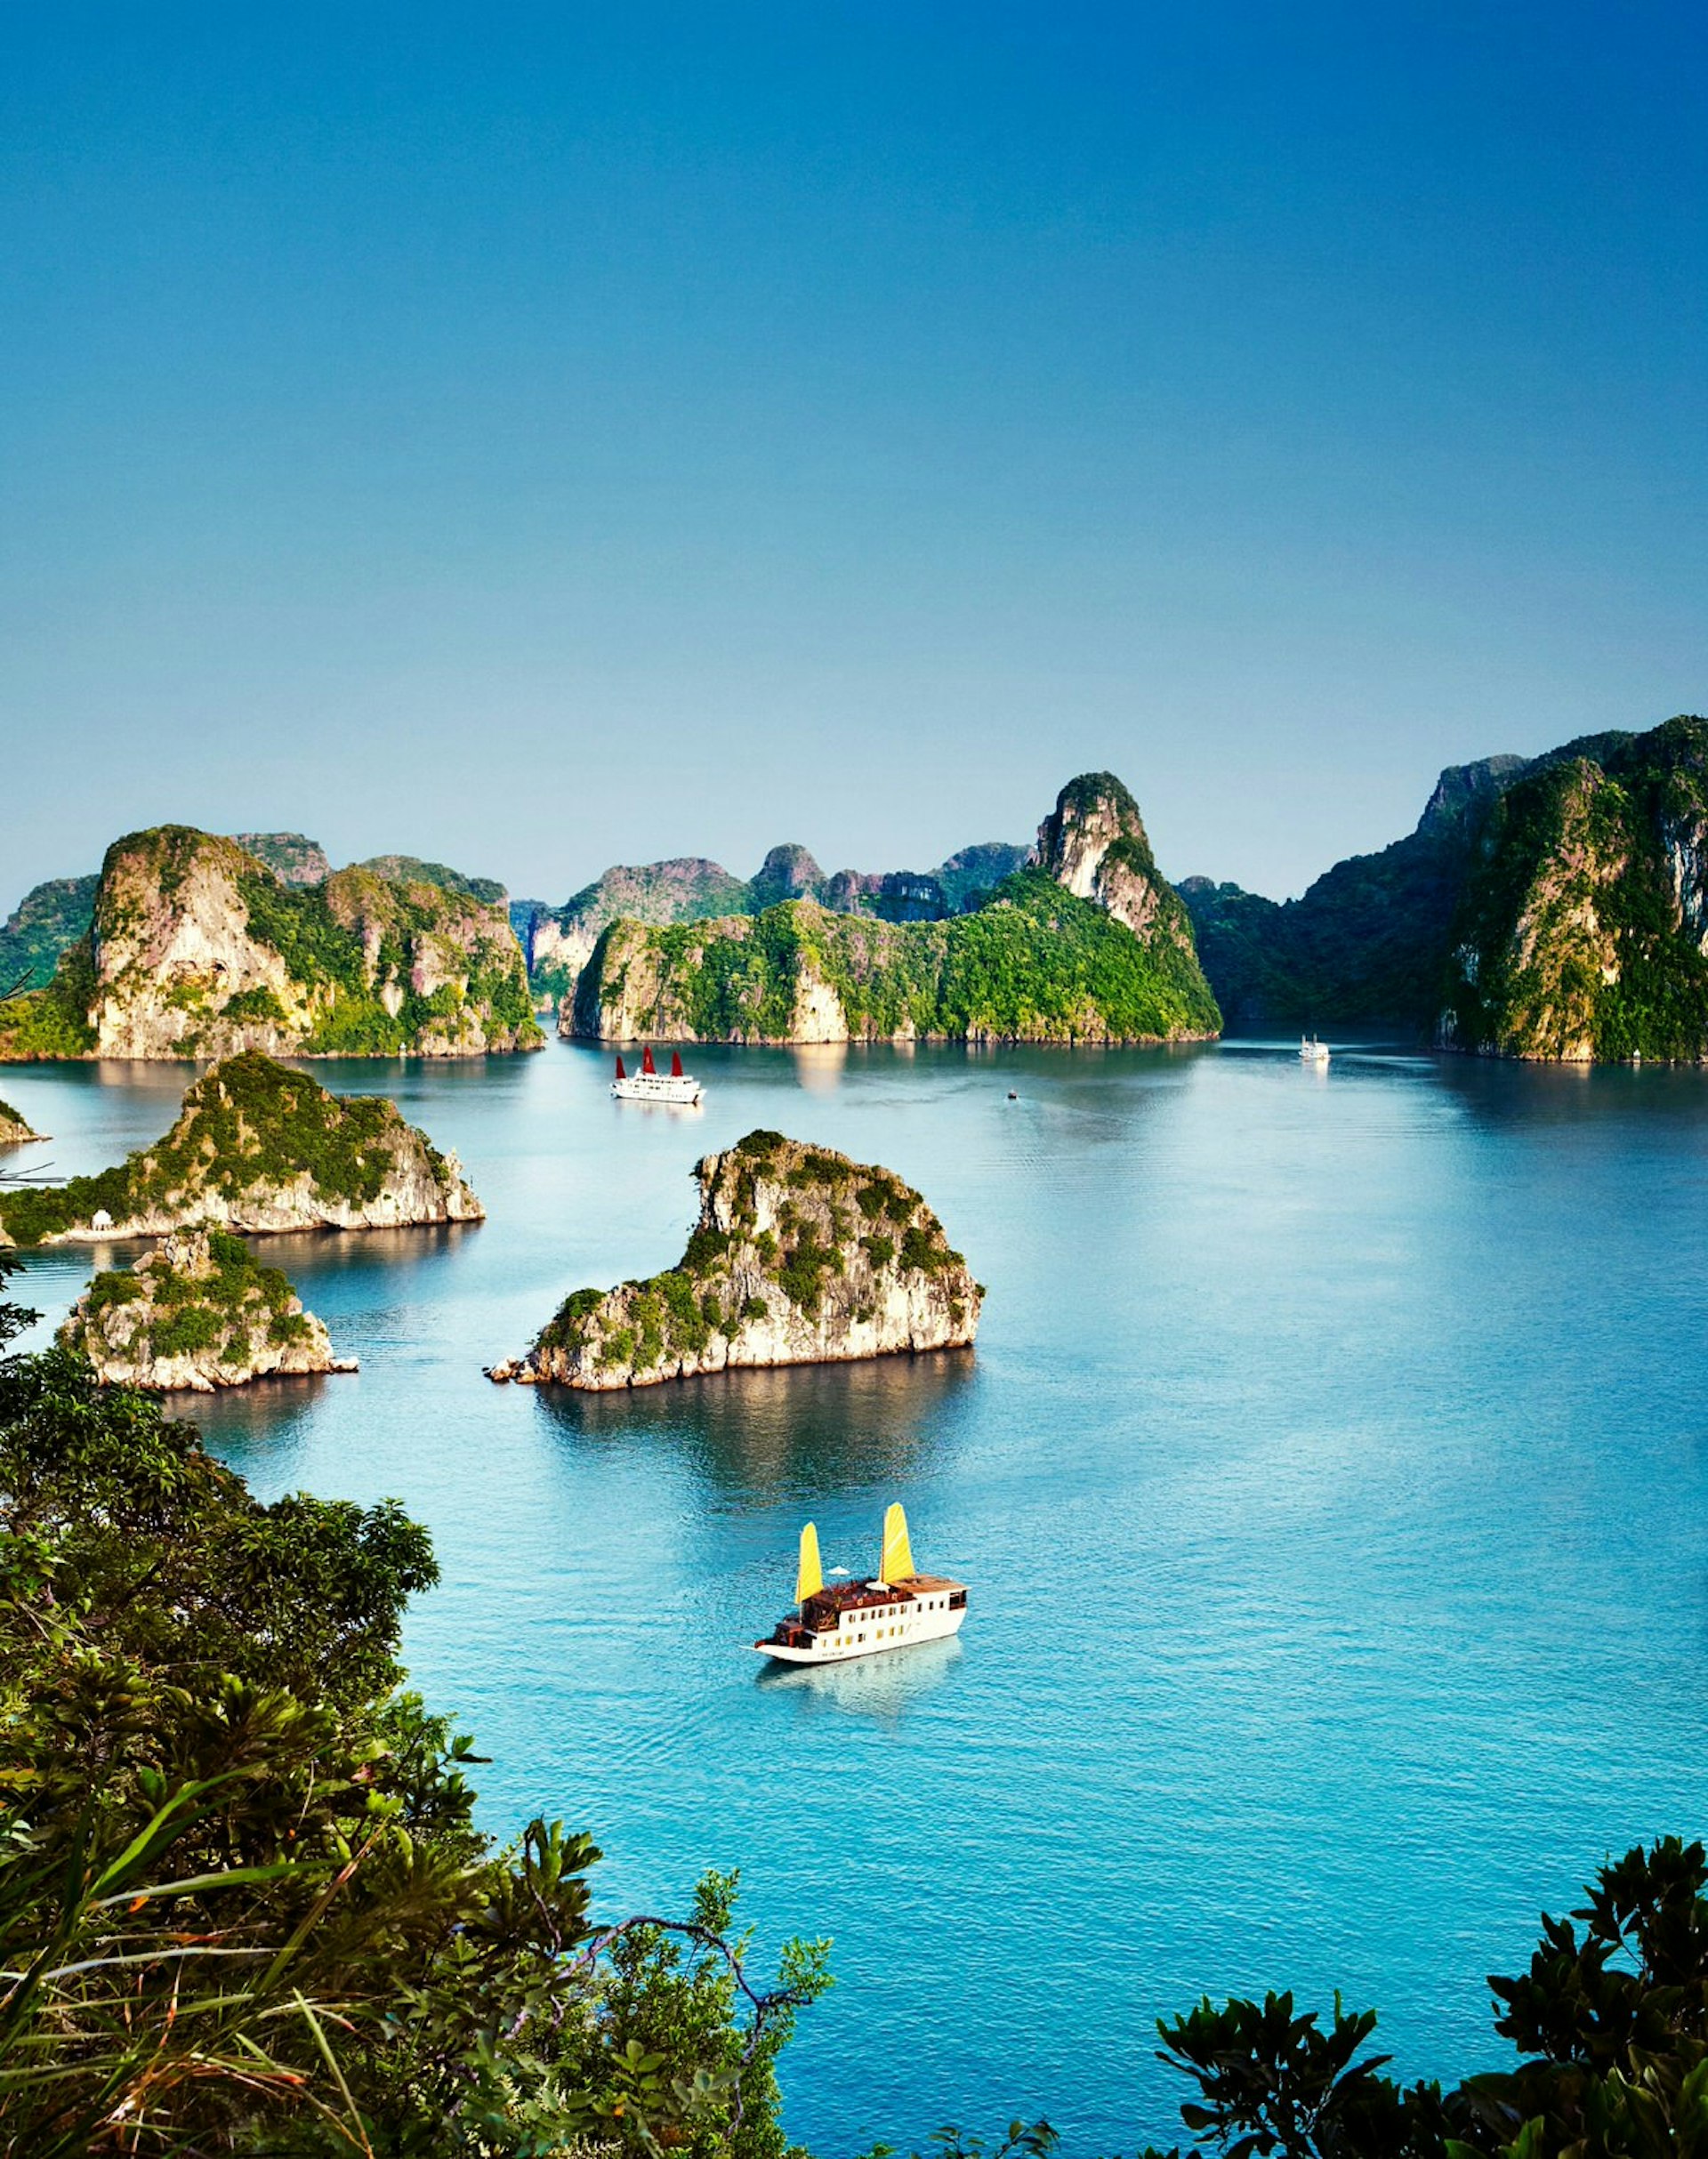 Lonely planet guide Vietnam - Sinhbalo